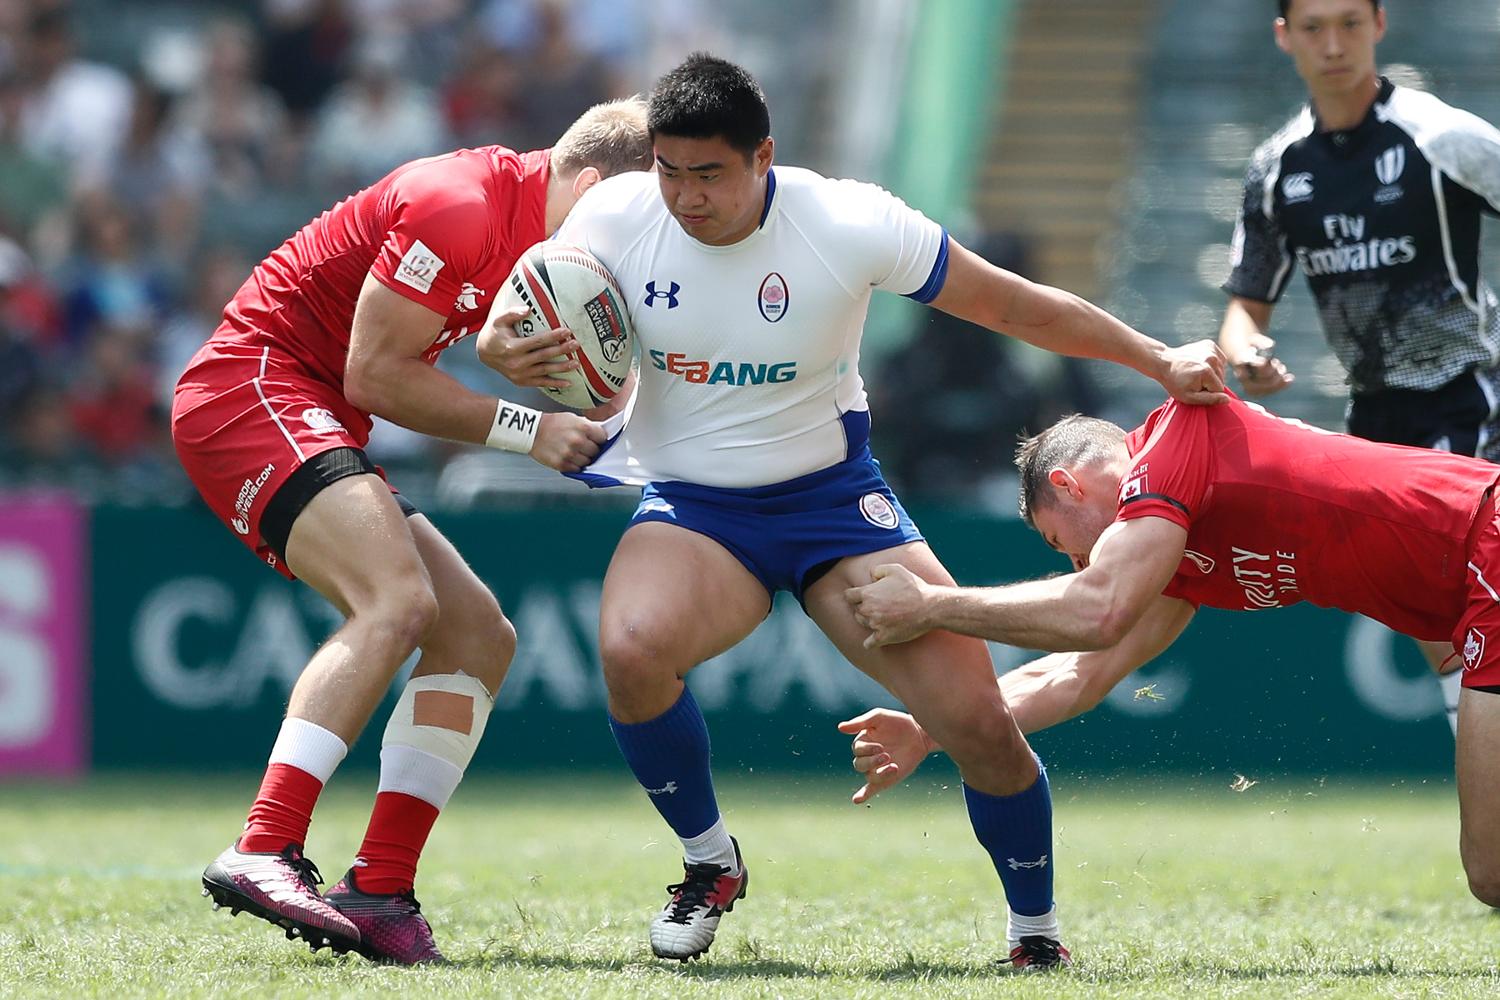 Teams announced for Asia Rugby Championship Top 3